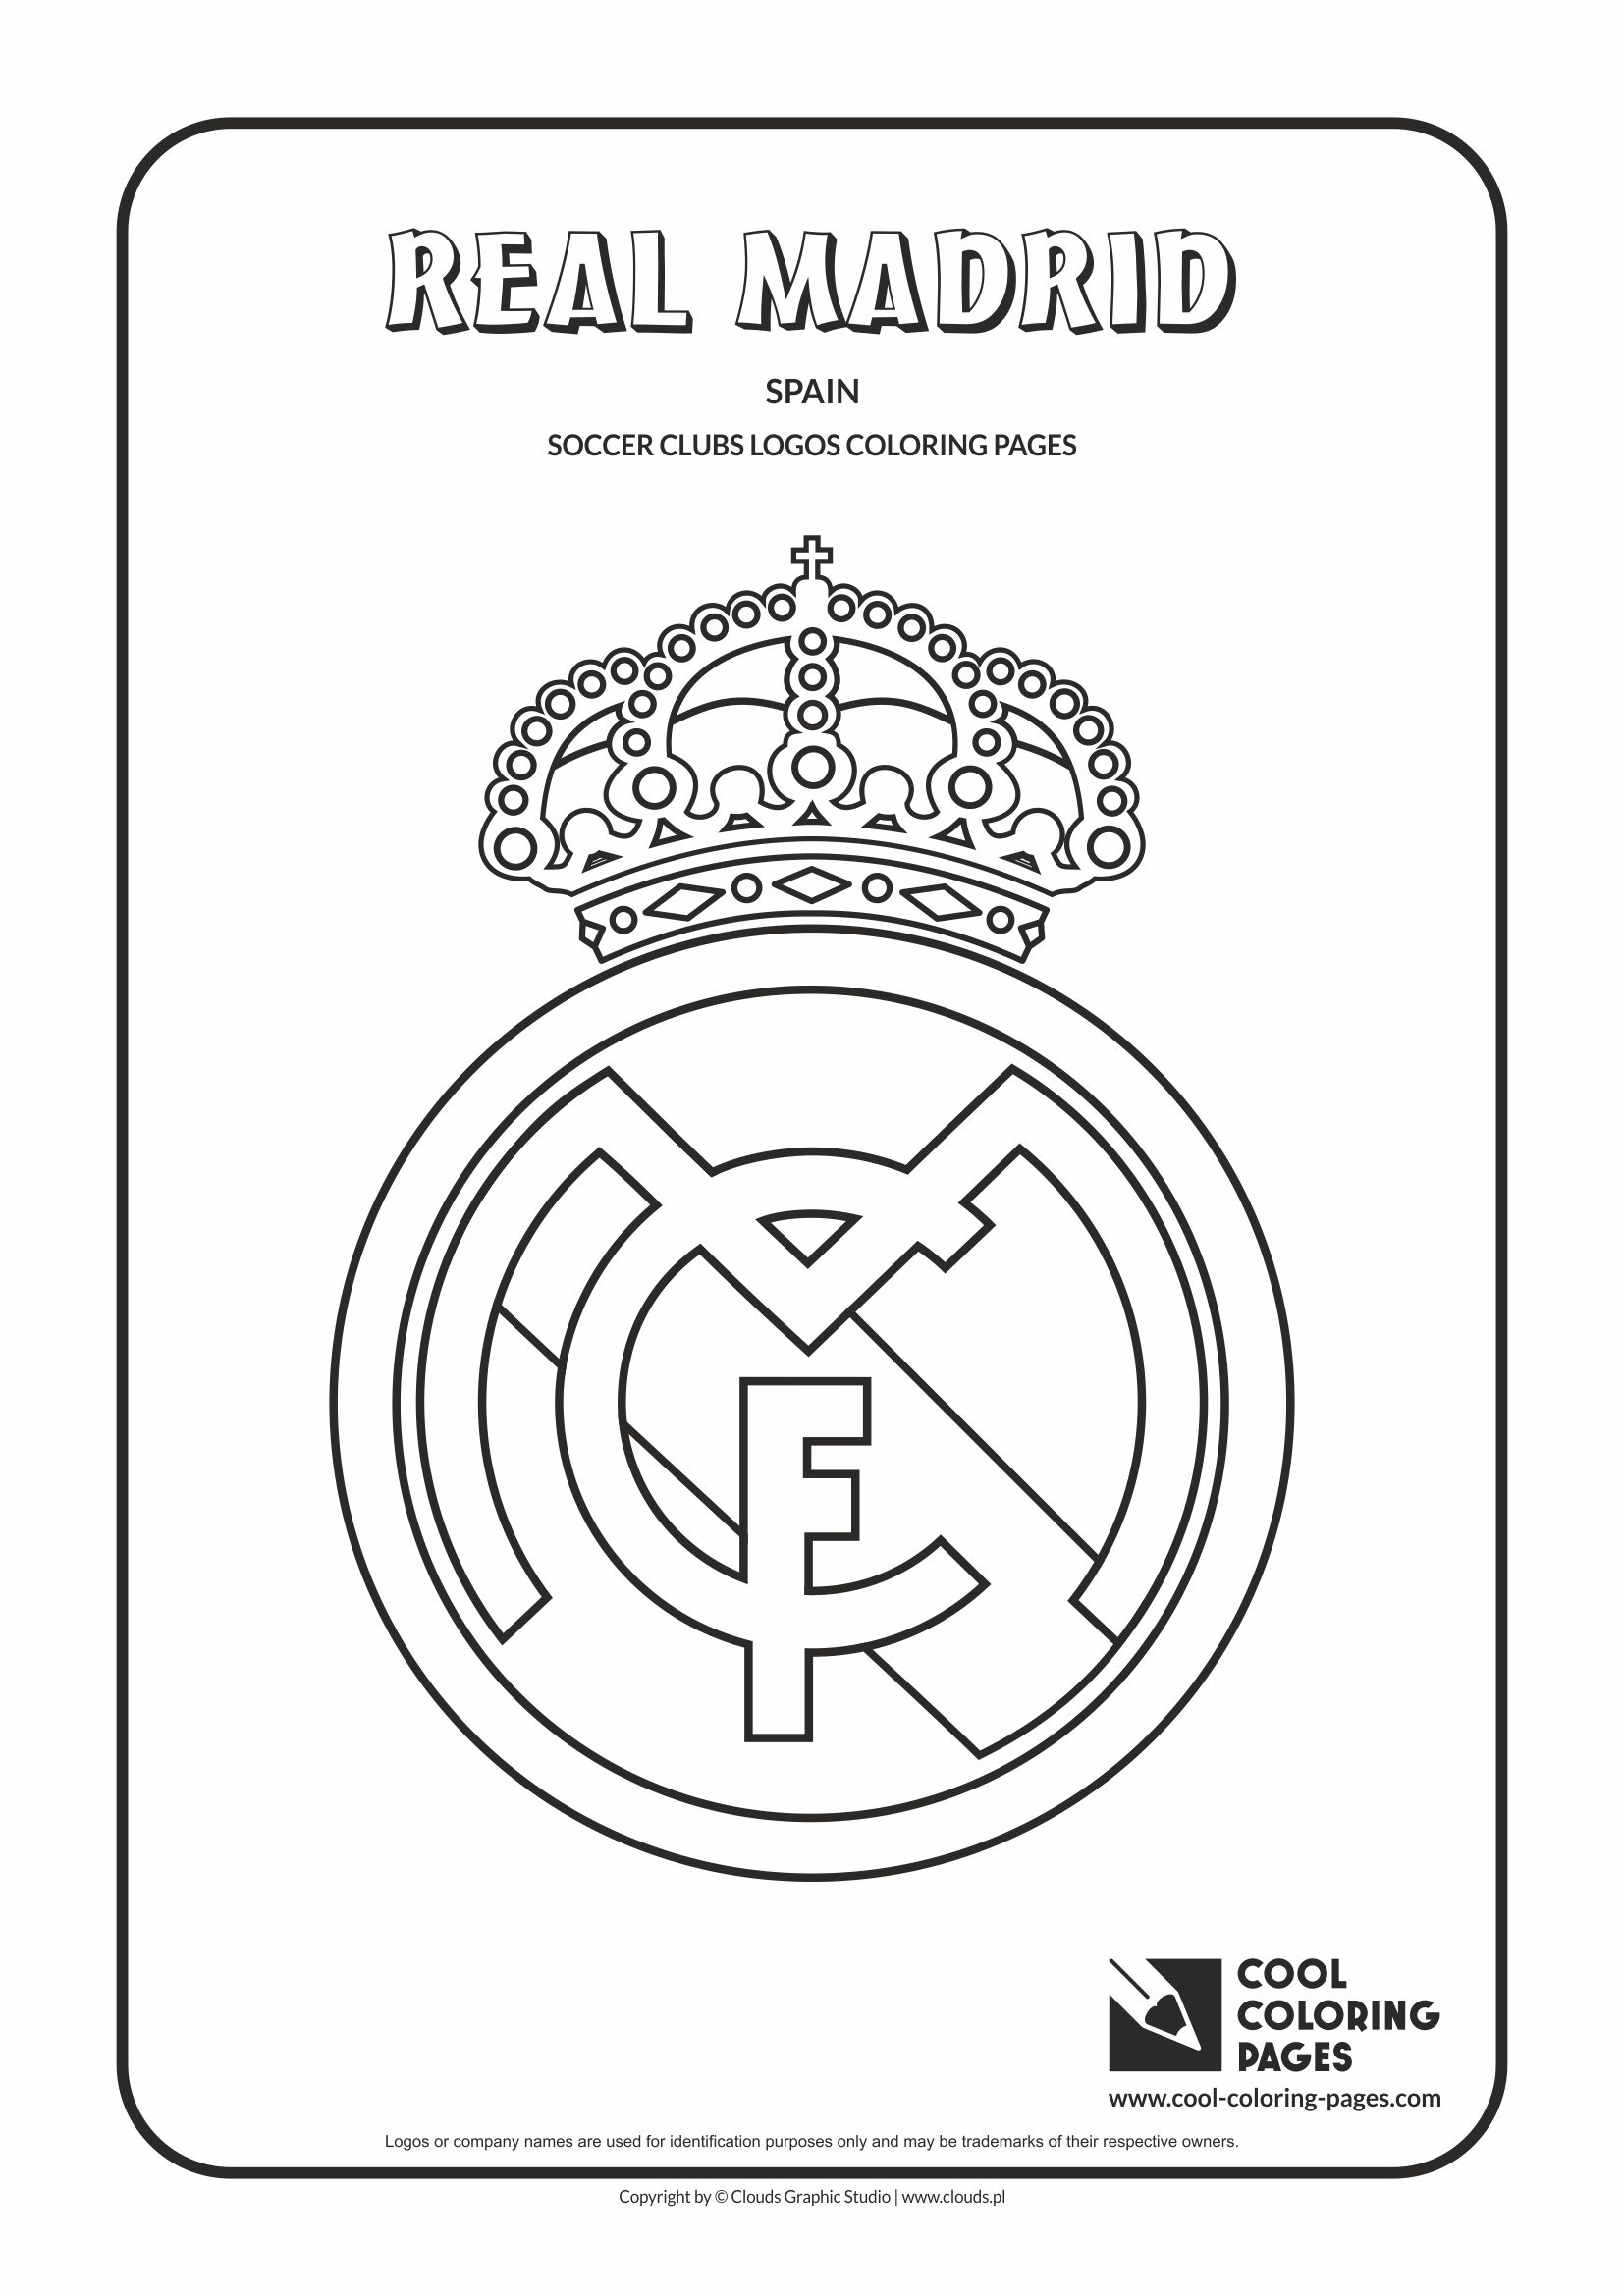 Cool Coloring Pages Real Madrid logo coloring page - Cool Coloring